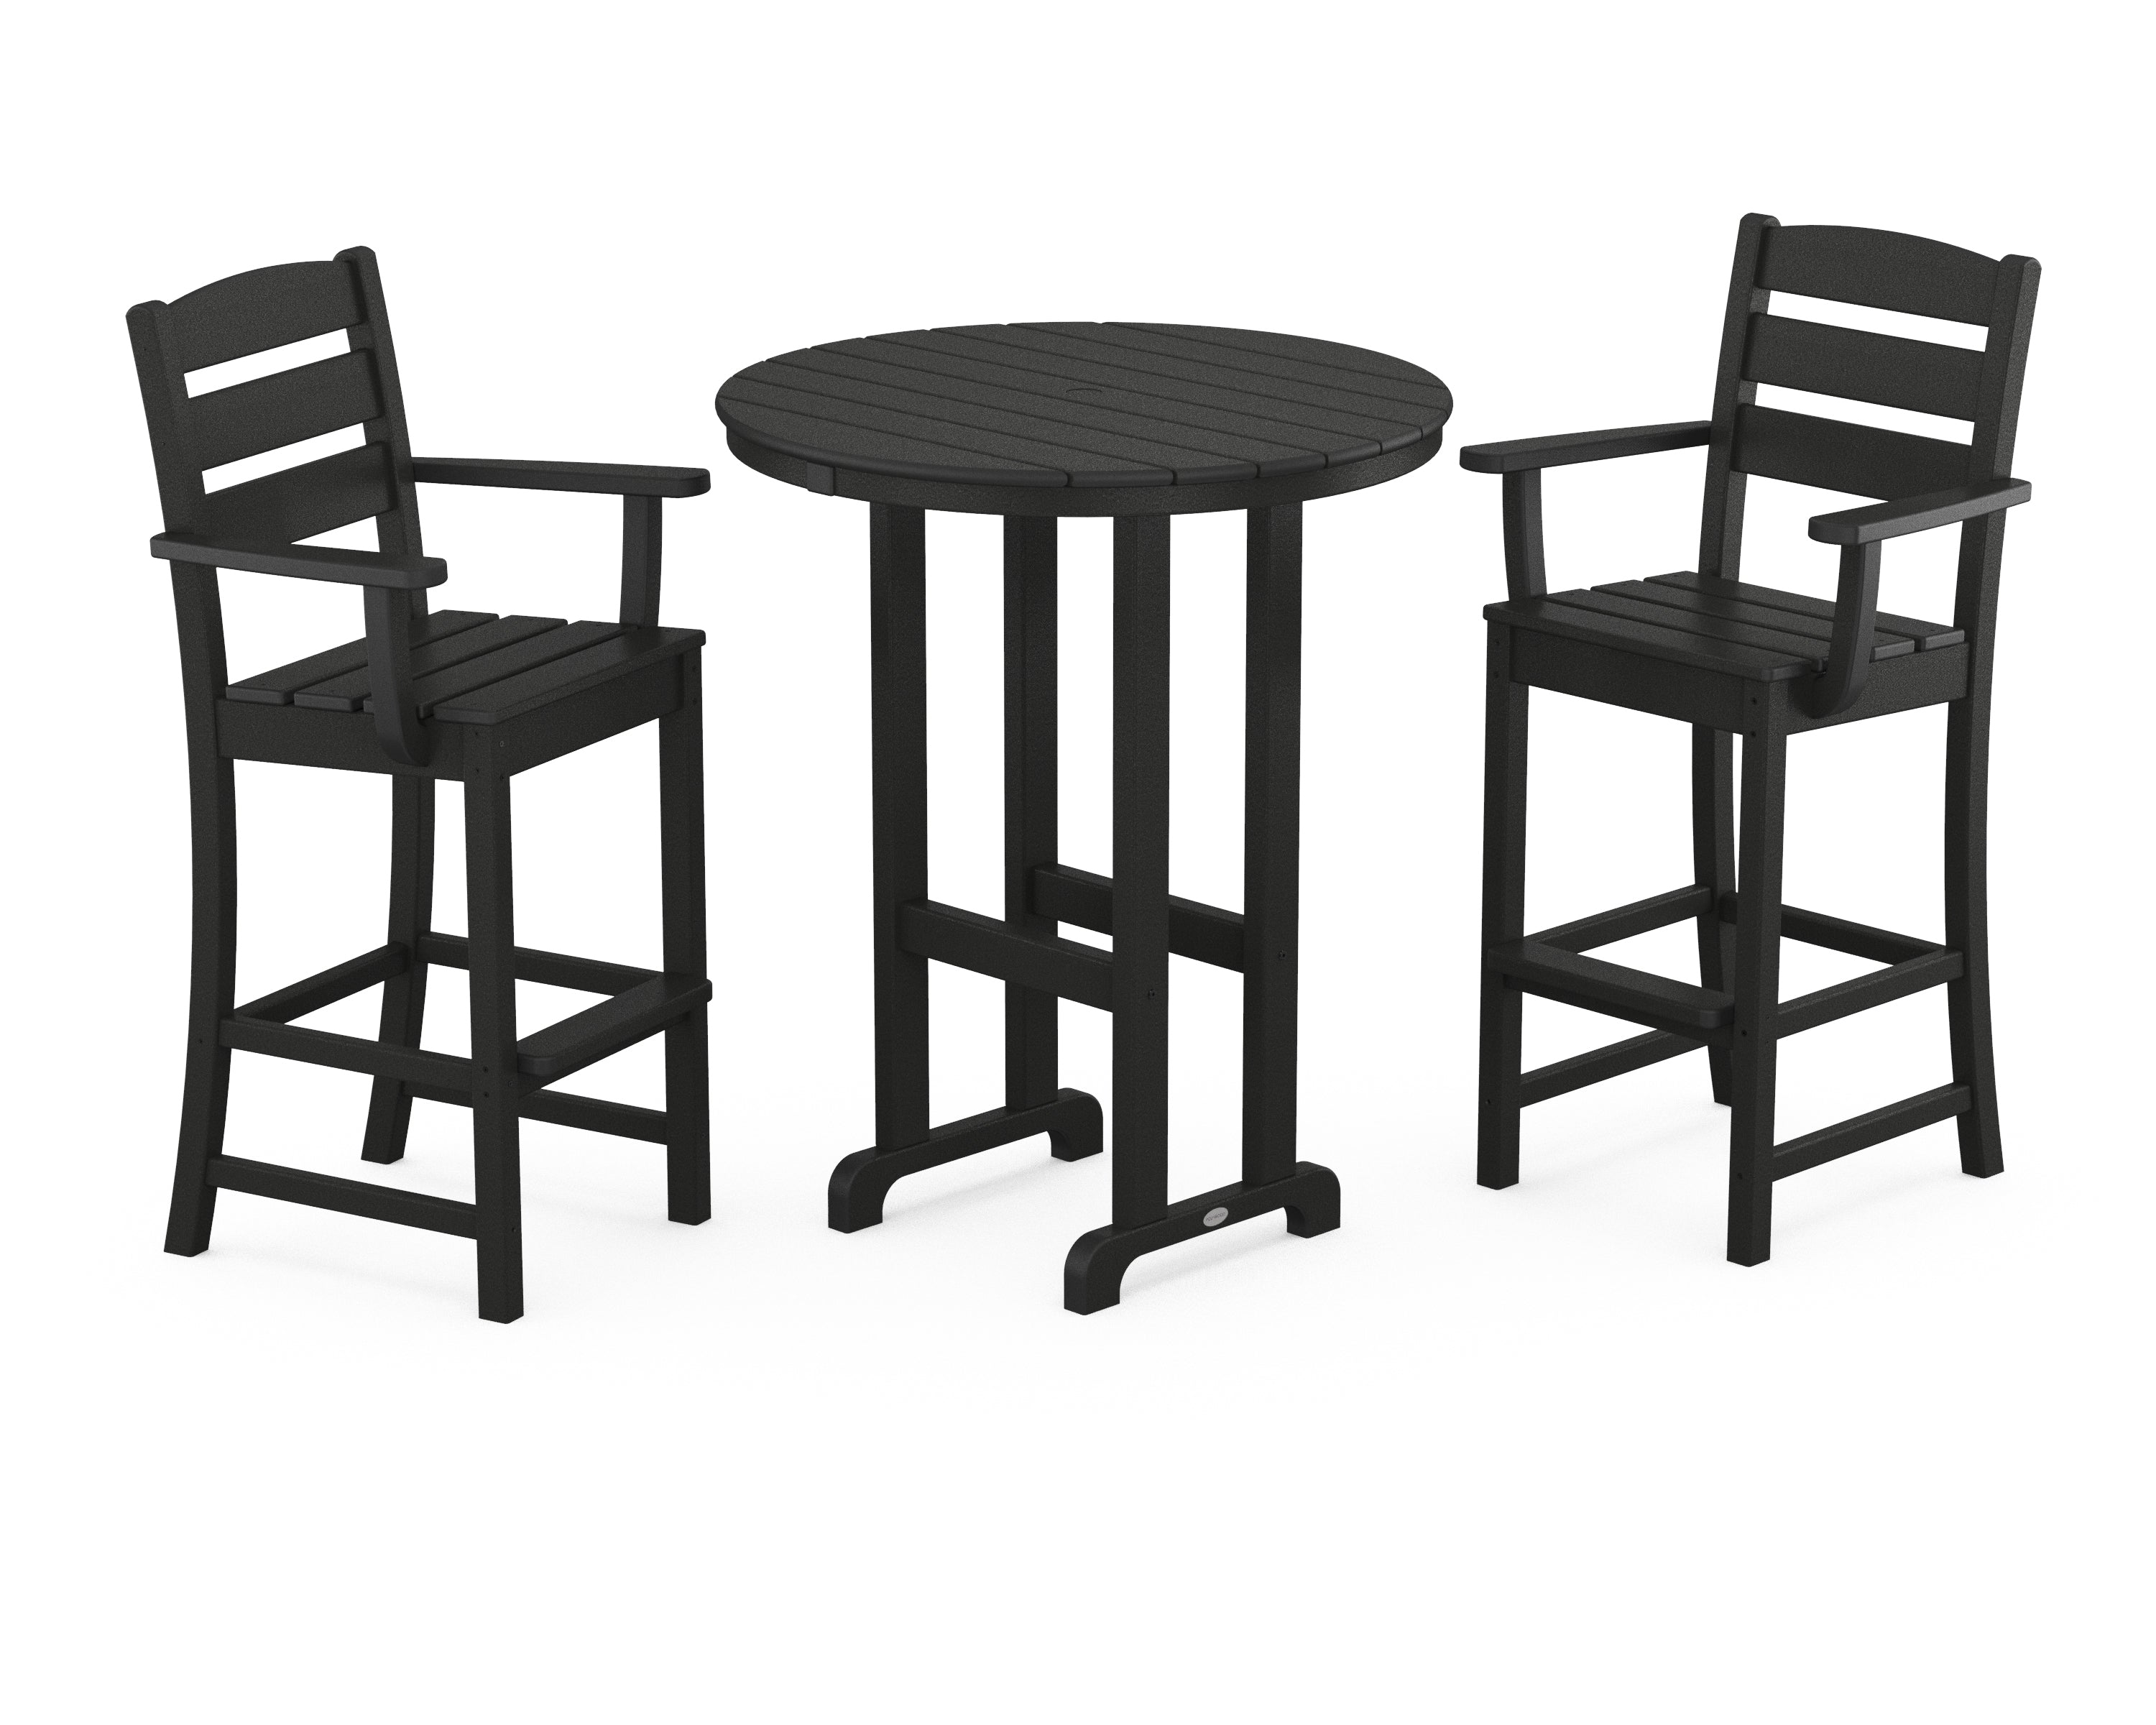 POLYWOOD® Lakeside 3-Piece Round Bar Arm Chair Set in Black